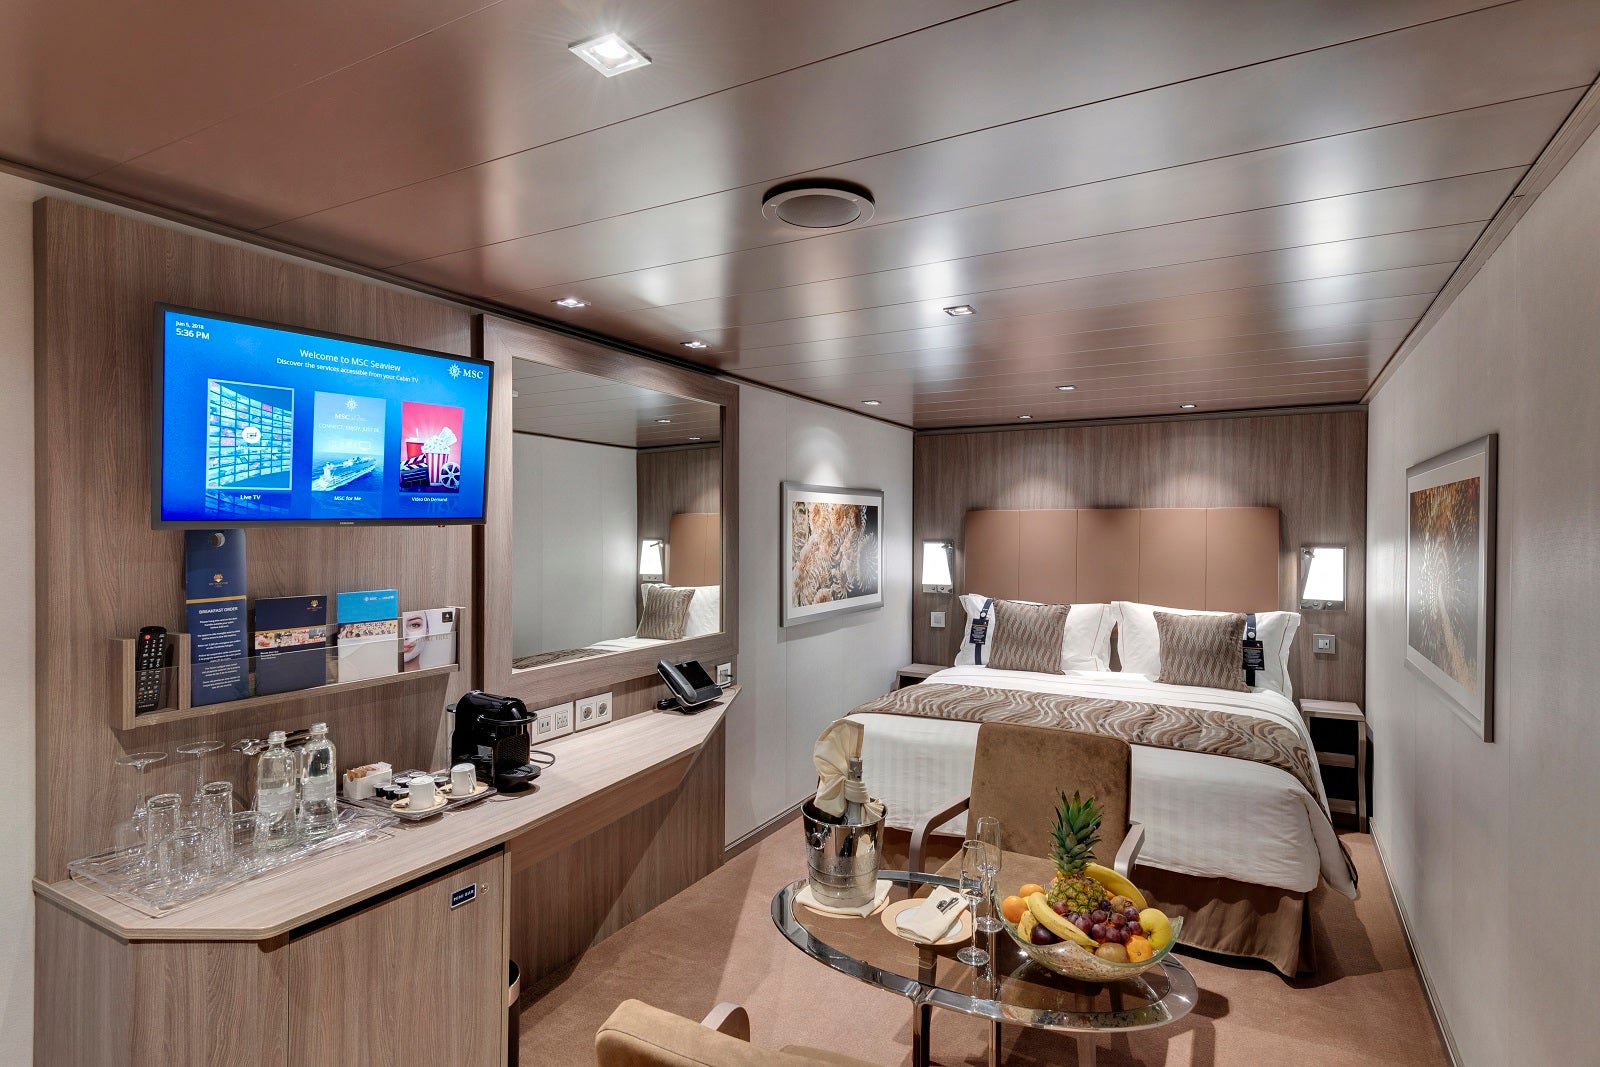 An interior cruise ship cabin decorated in neutral colors with a bed, desk, TV and mirror